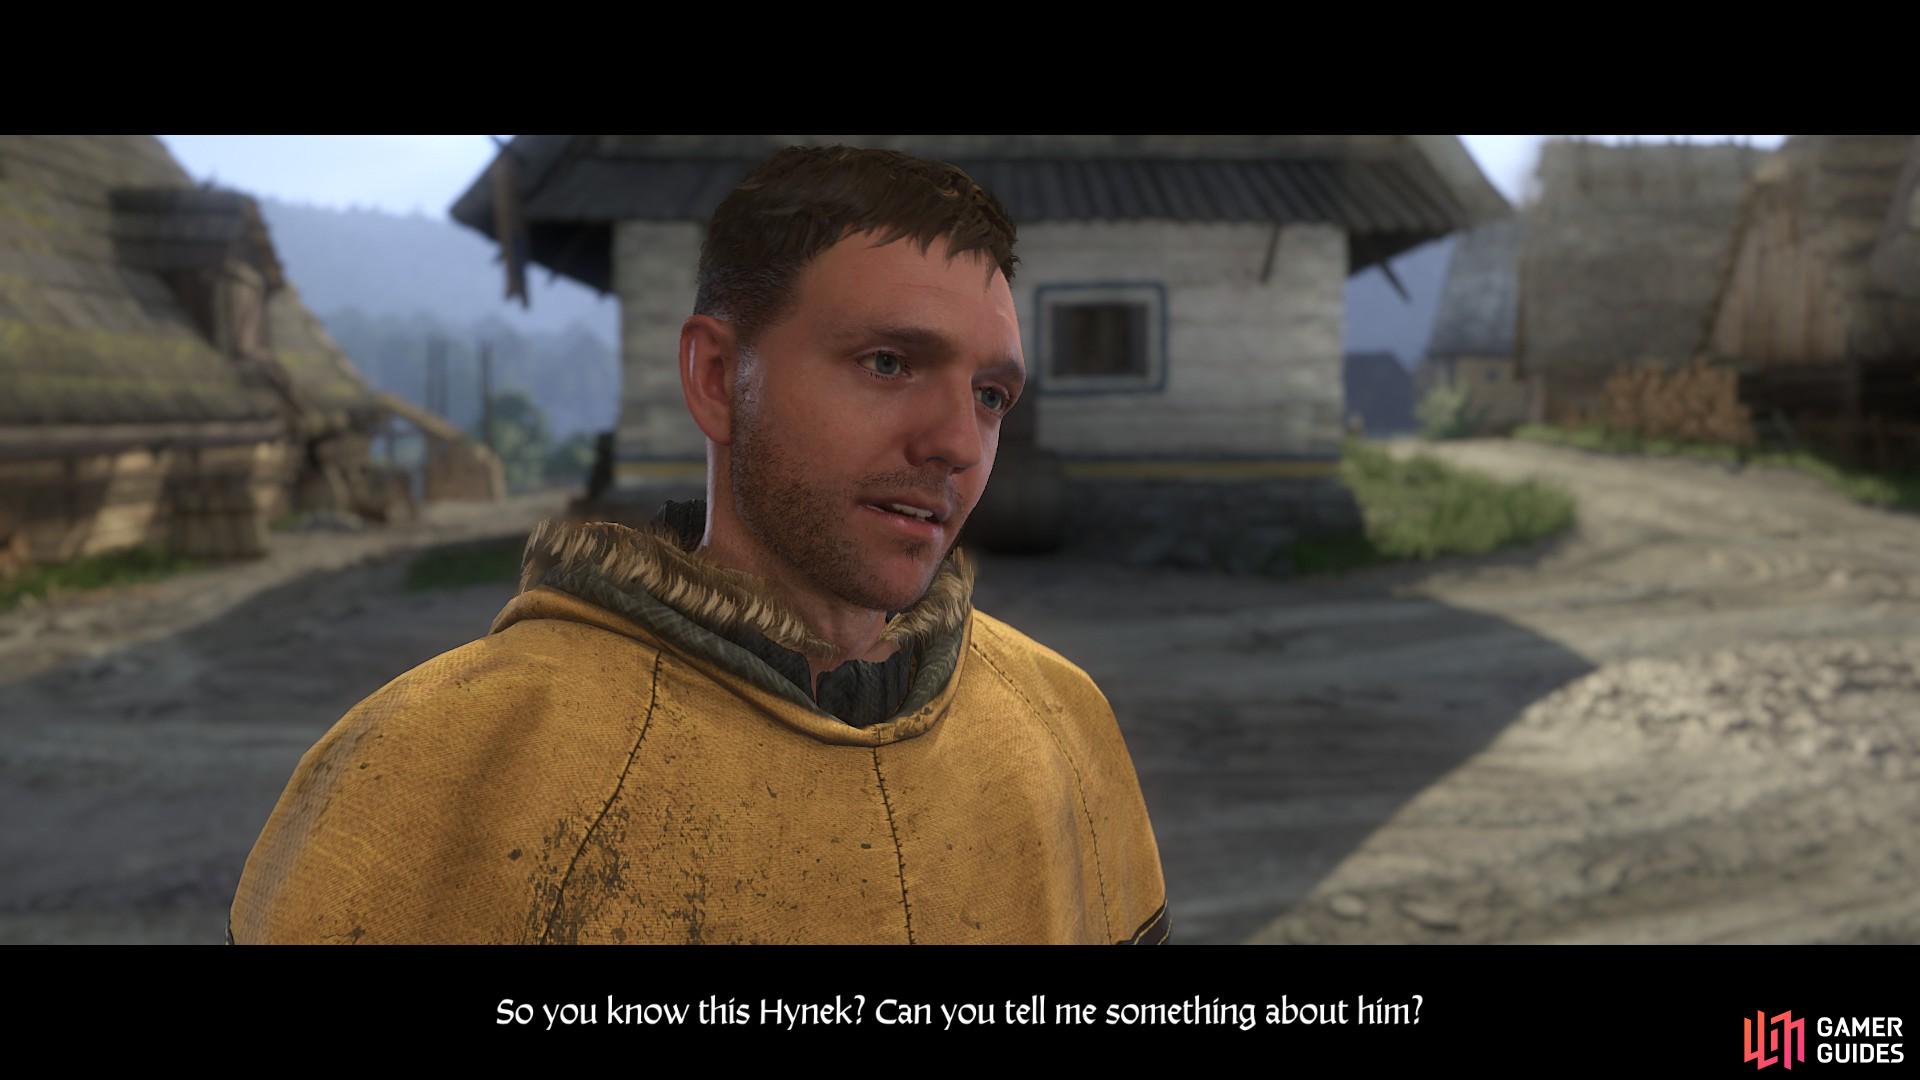 When you arrive in Ledetchko, ask anyone in the settlement if they know of Reeky.